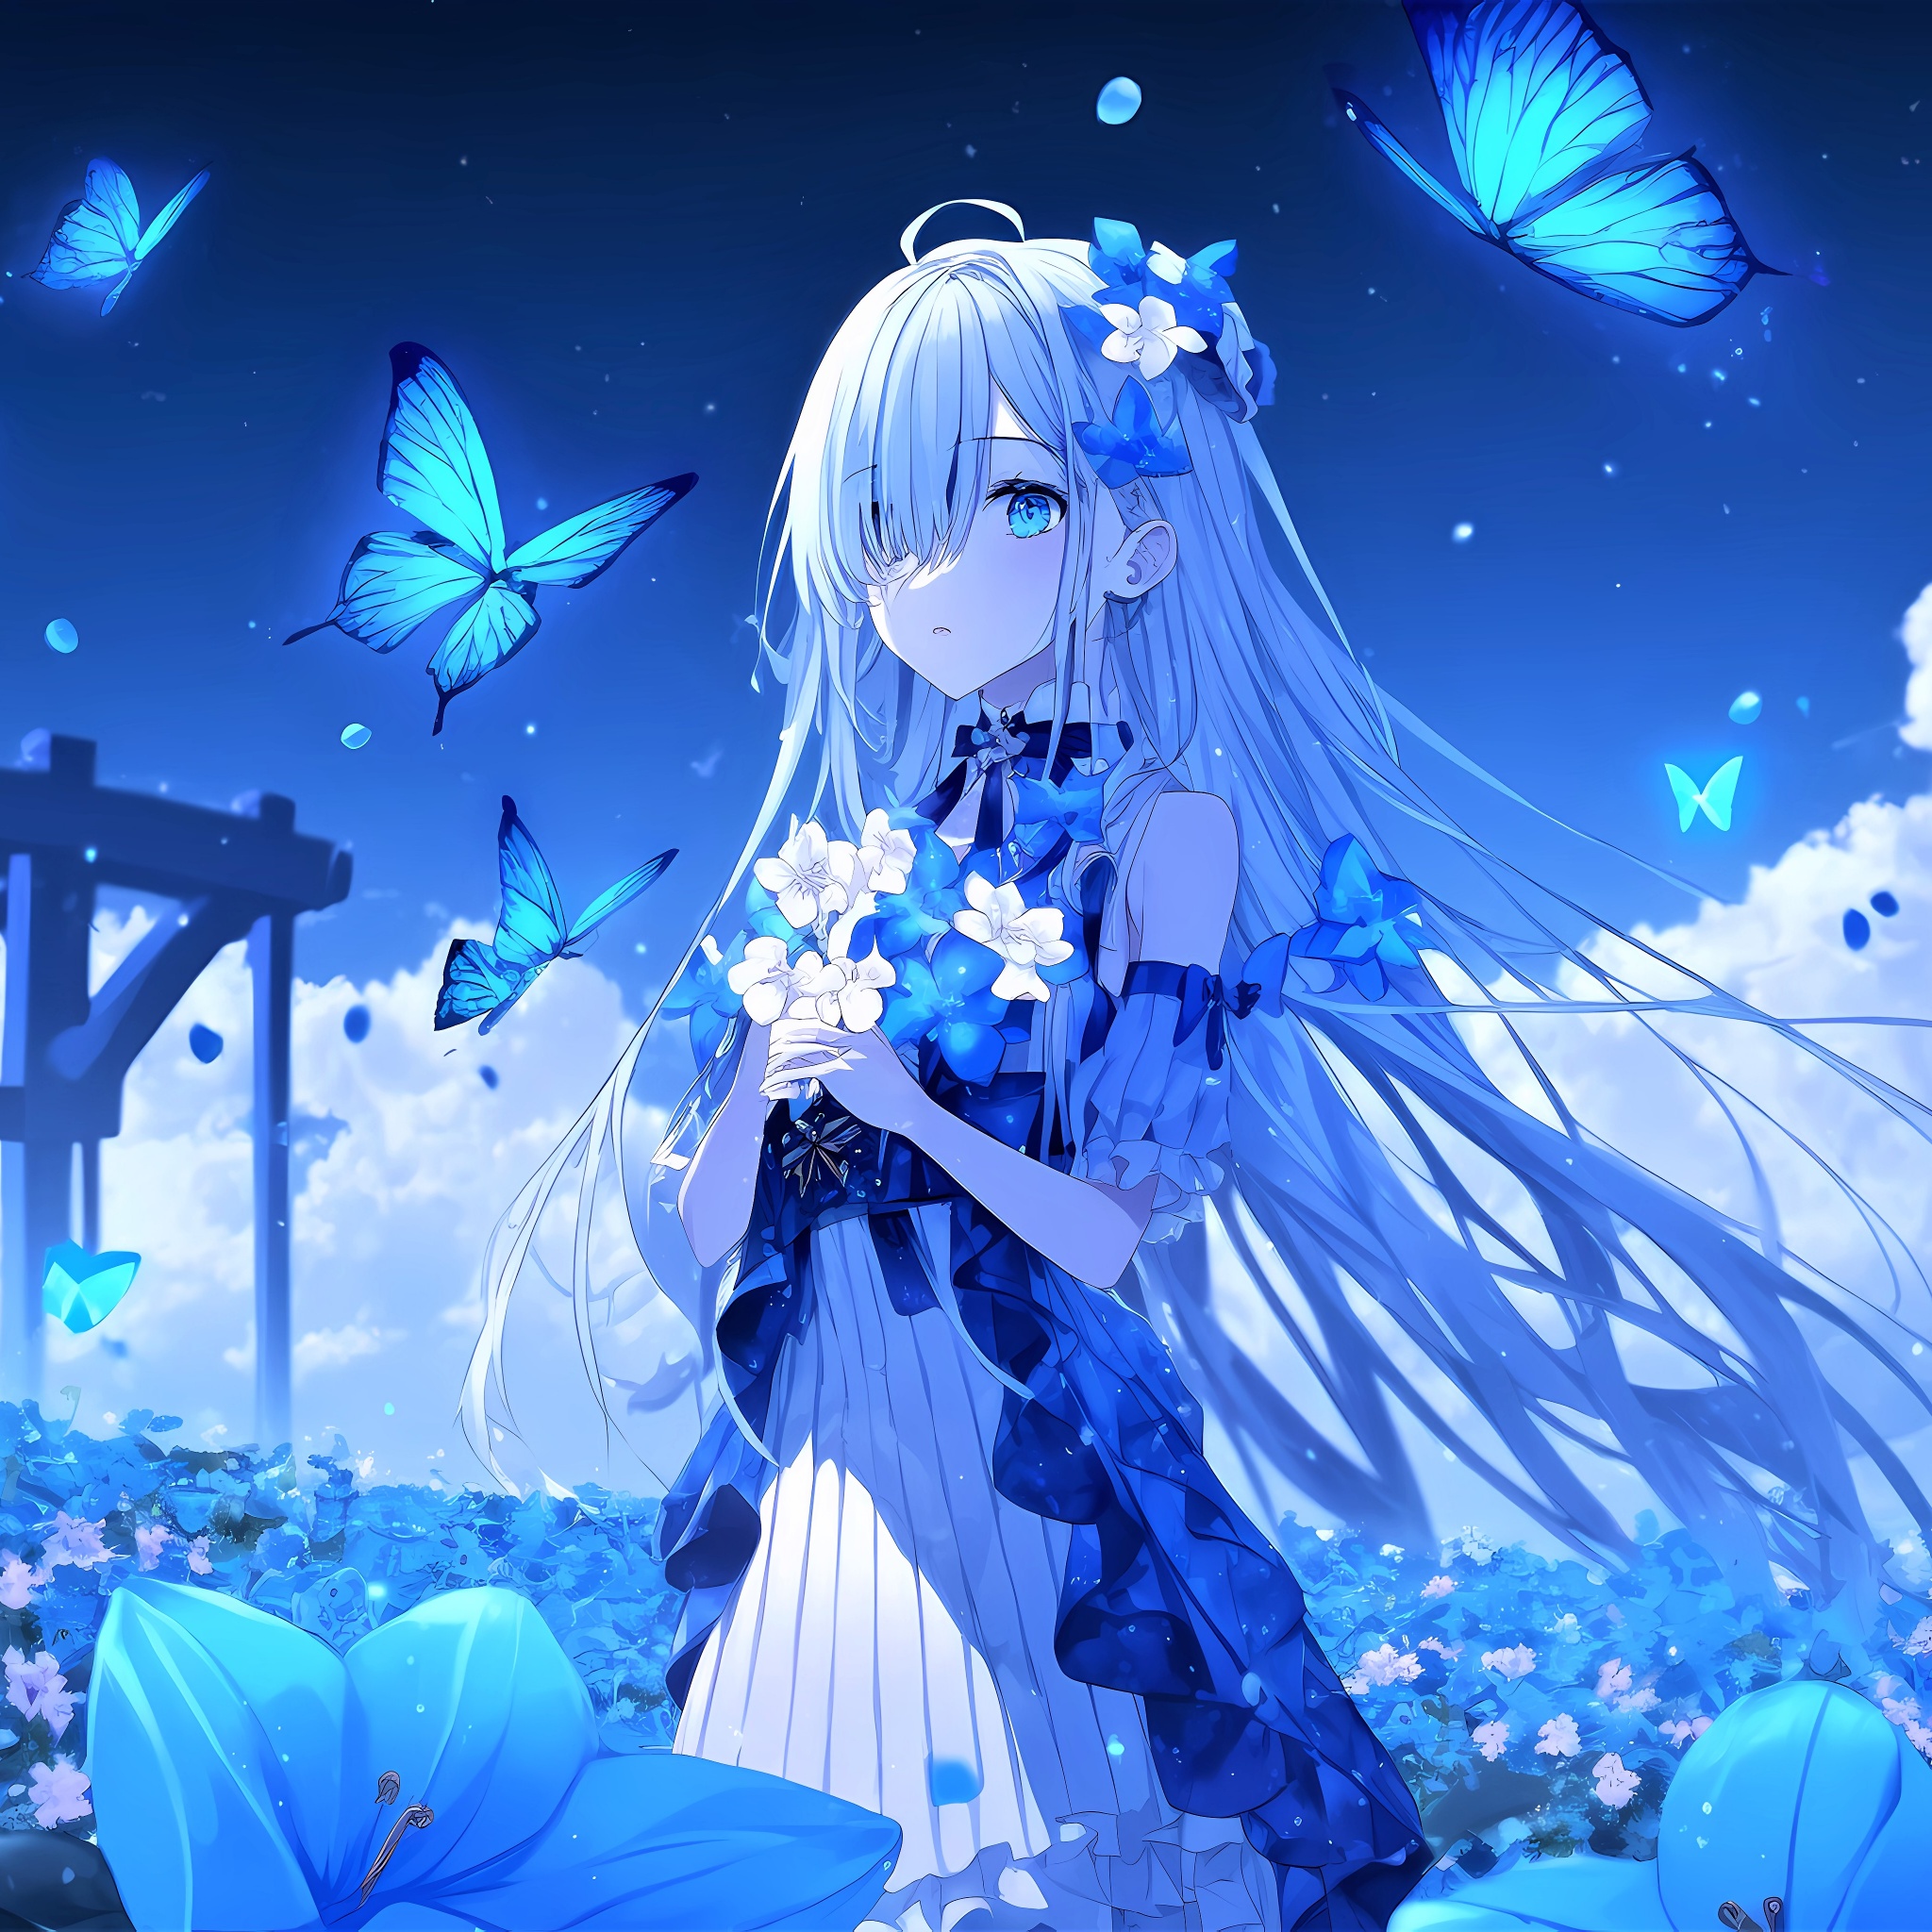 Anime Blue Wallpapers - Top Free Anime Blue Backgrounds - WallpaperAccess-demhanvico.com.vn